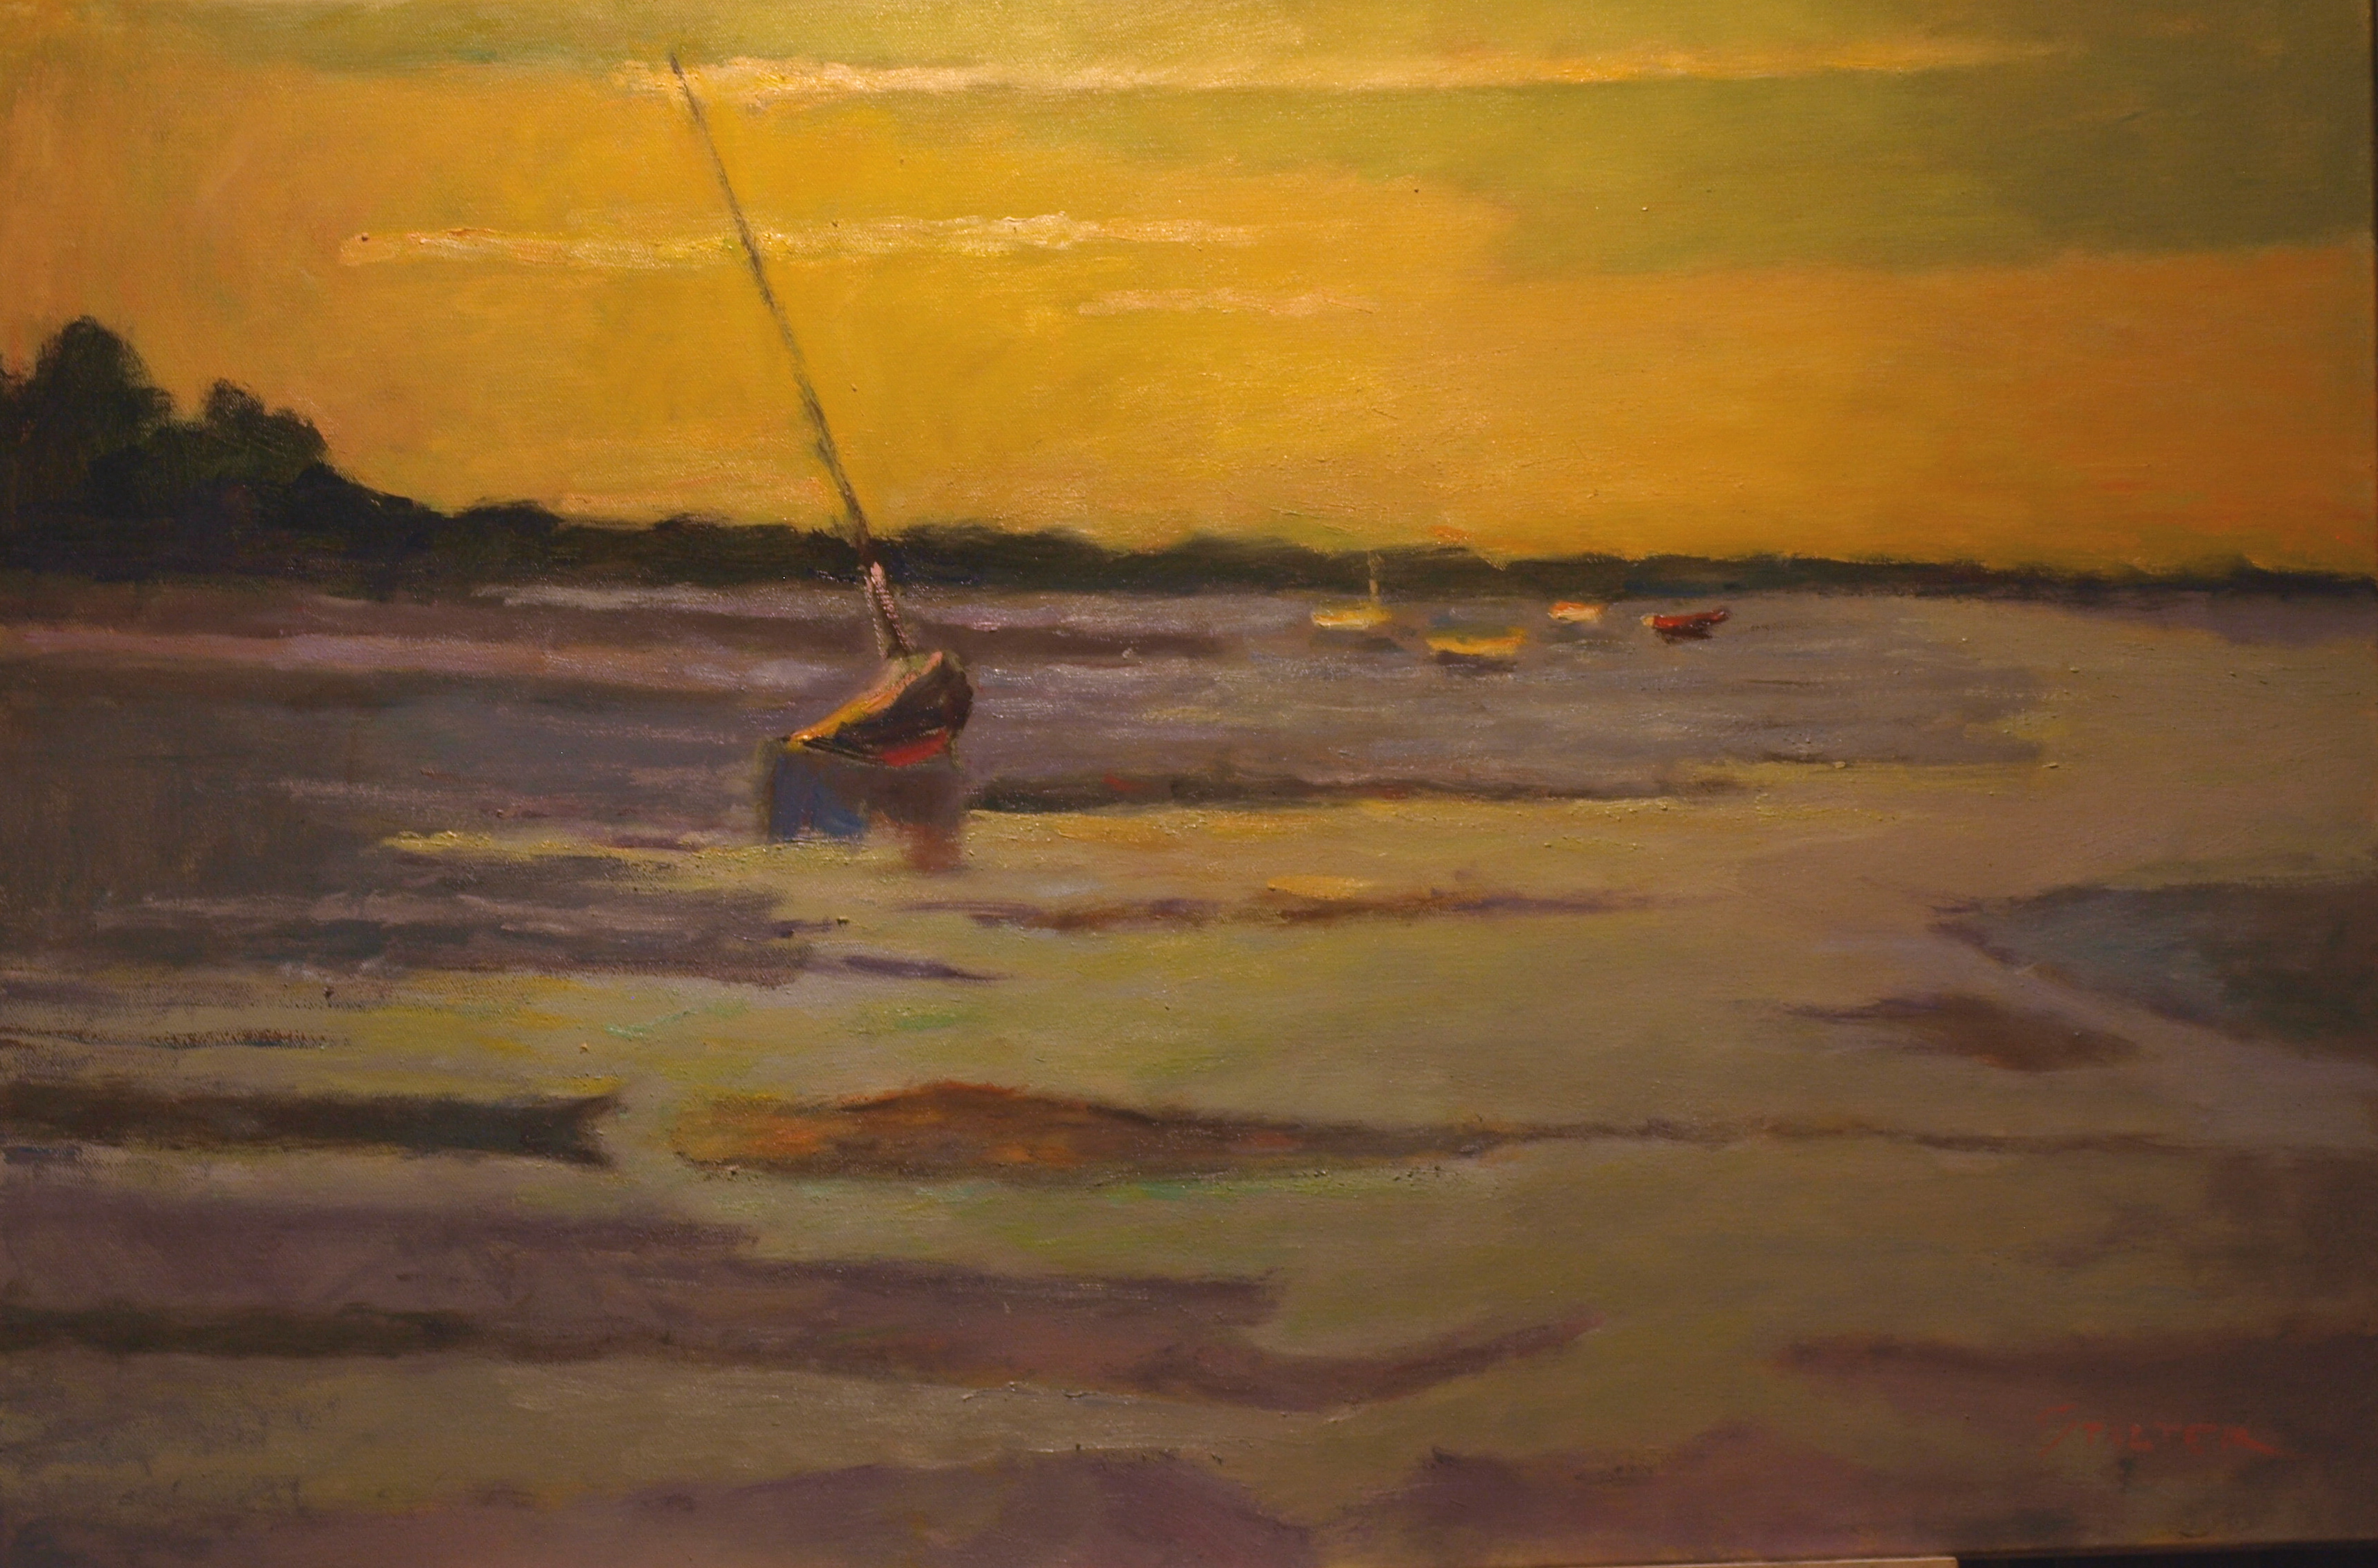 Low Tide -- Provincetown, Oil on Canvas, 24 x 36 Inches, by Richard Stalter, $1200